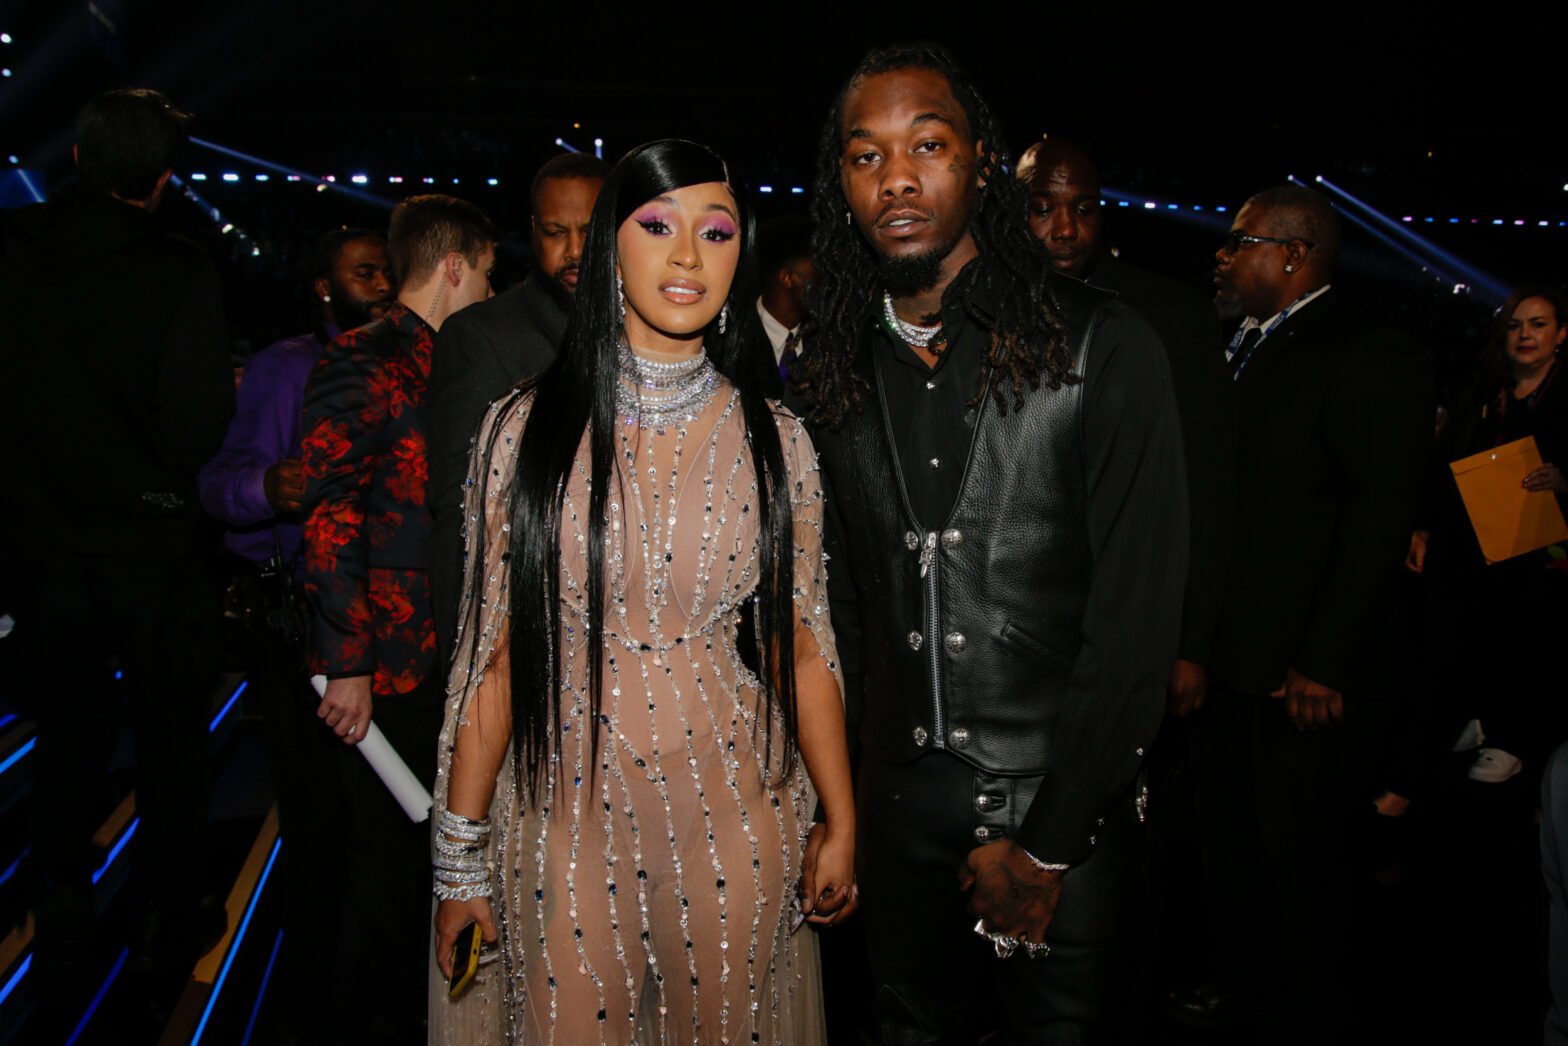 who is cardi b's husband? pictured: cardi b and offset